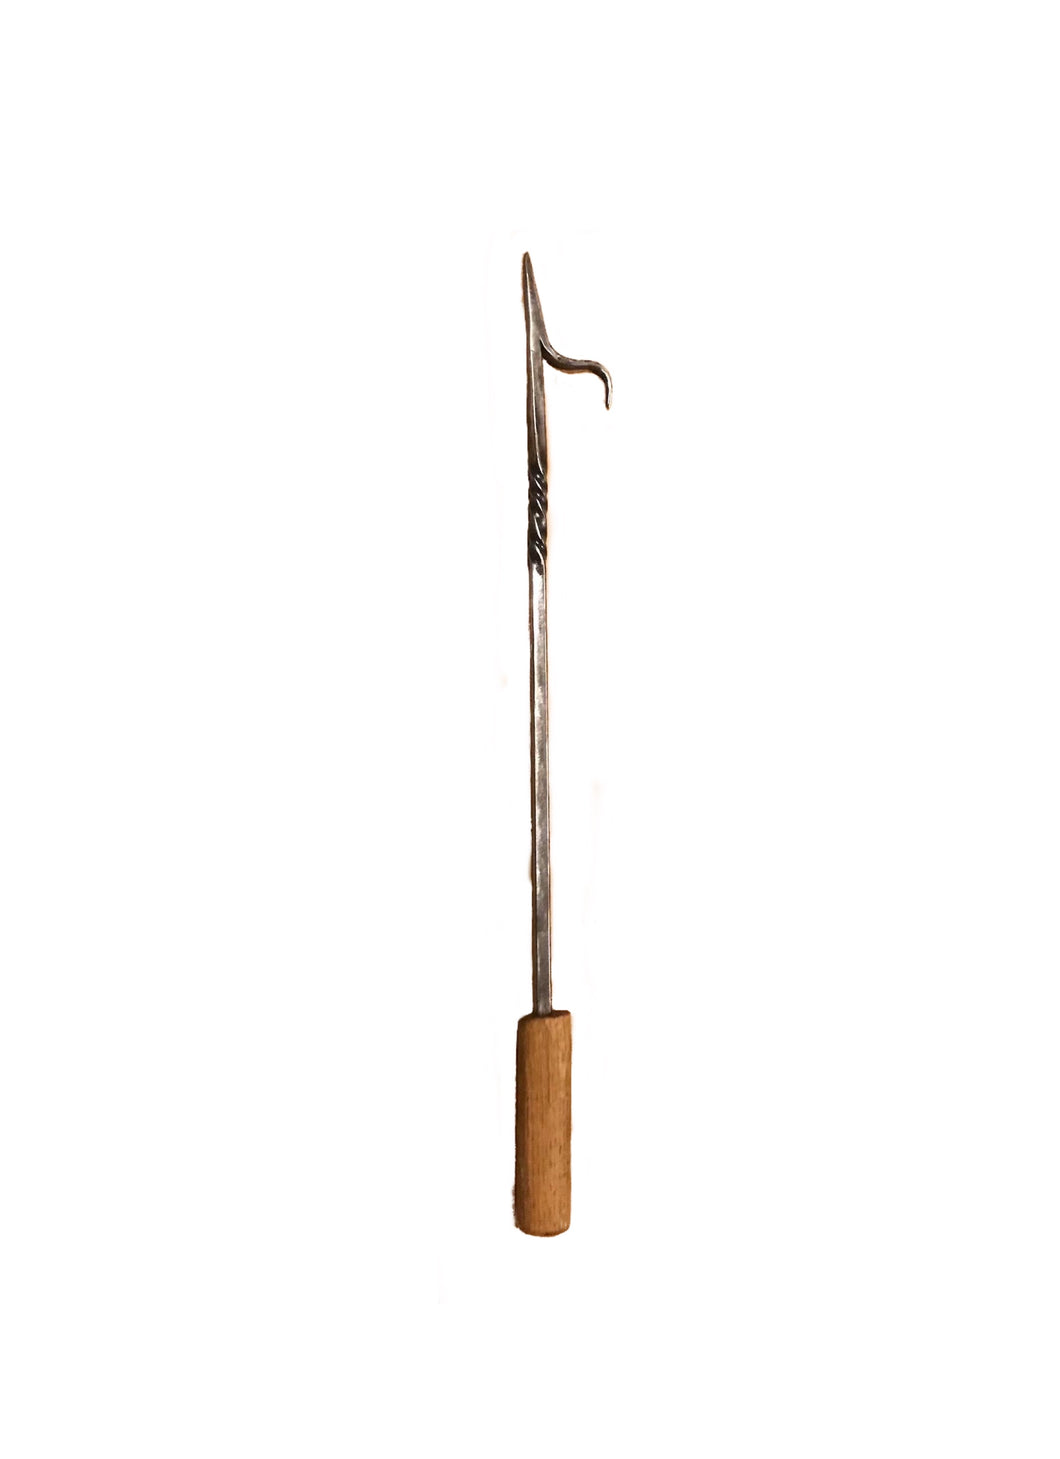 Fire poker with wooden handle